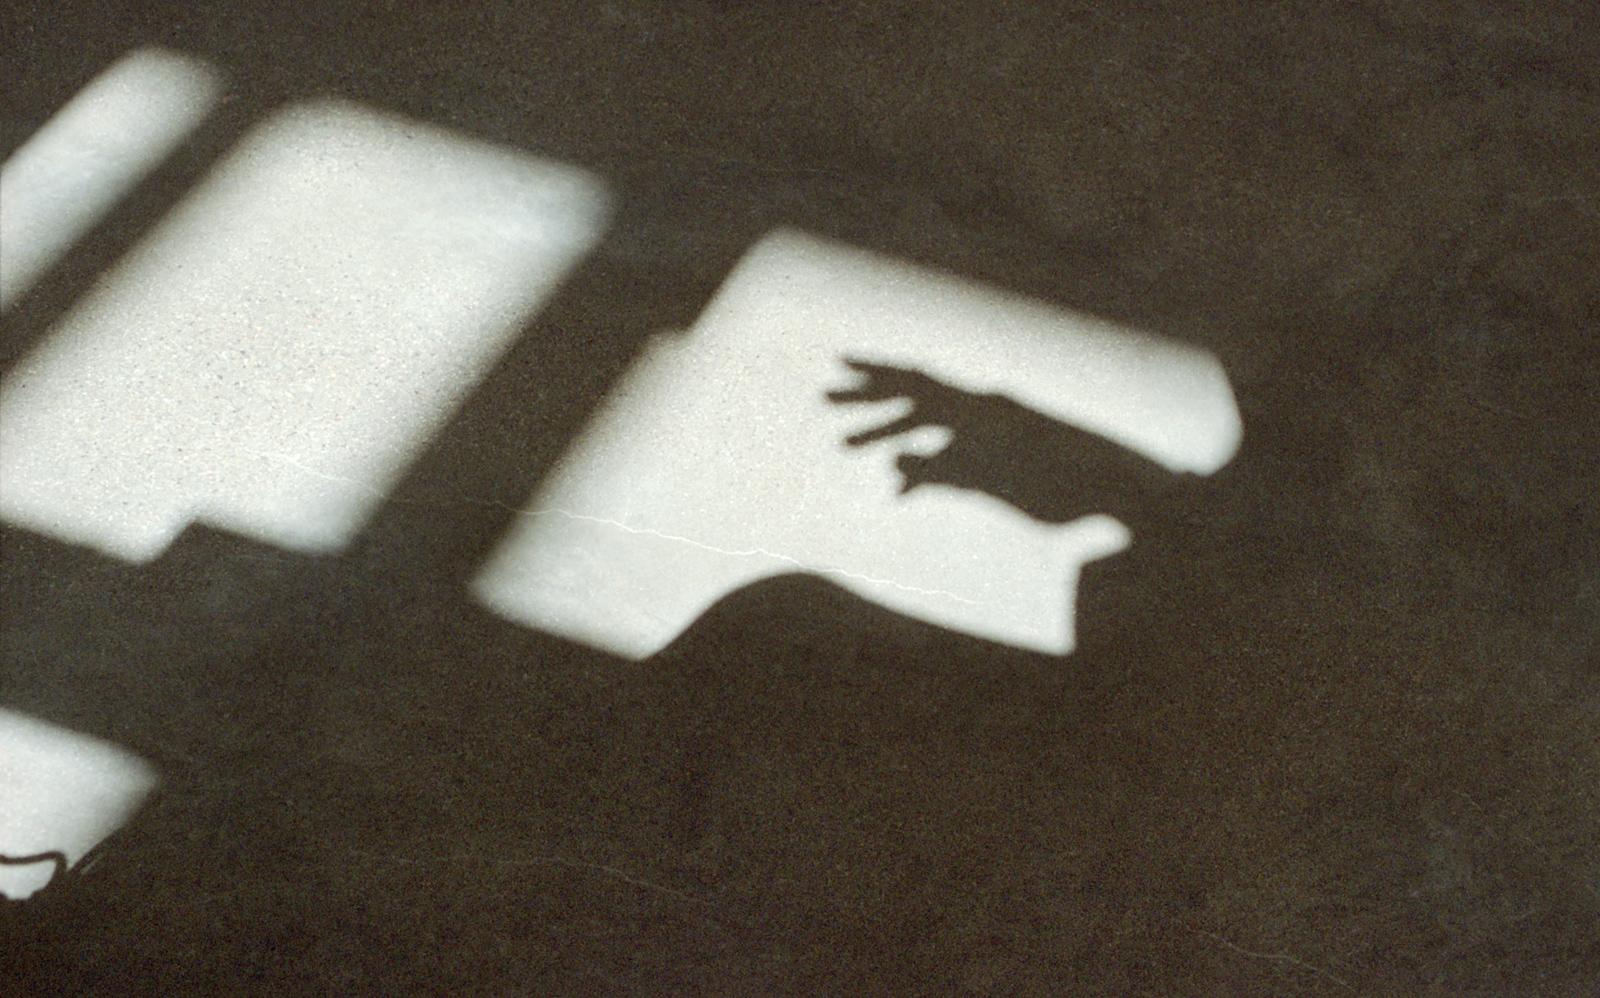 A shadow of a hand.